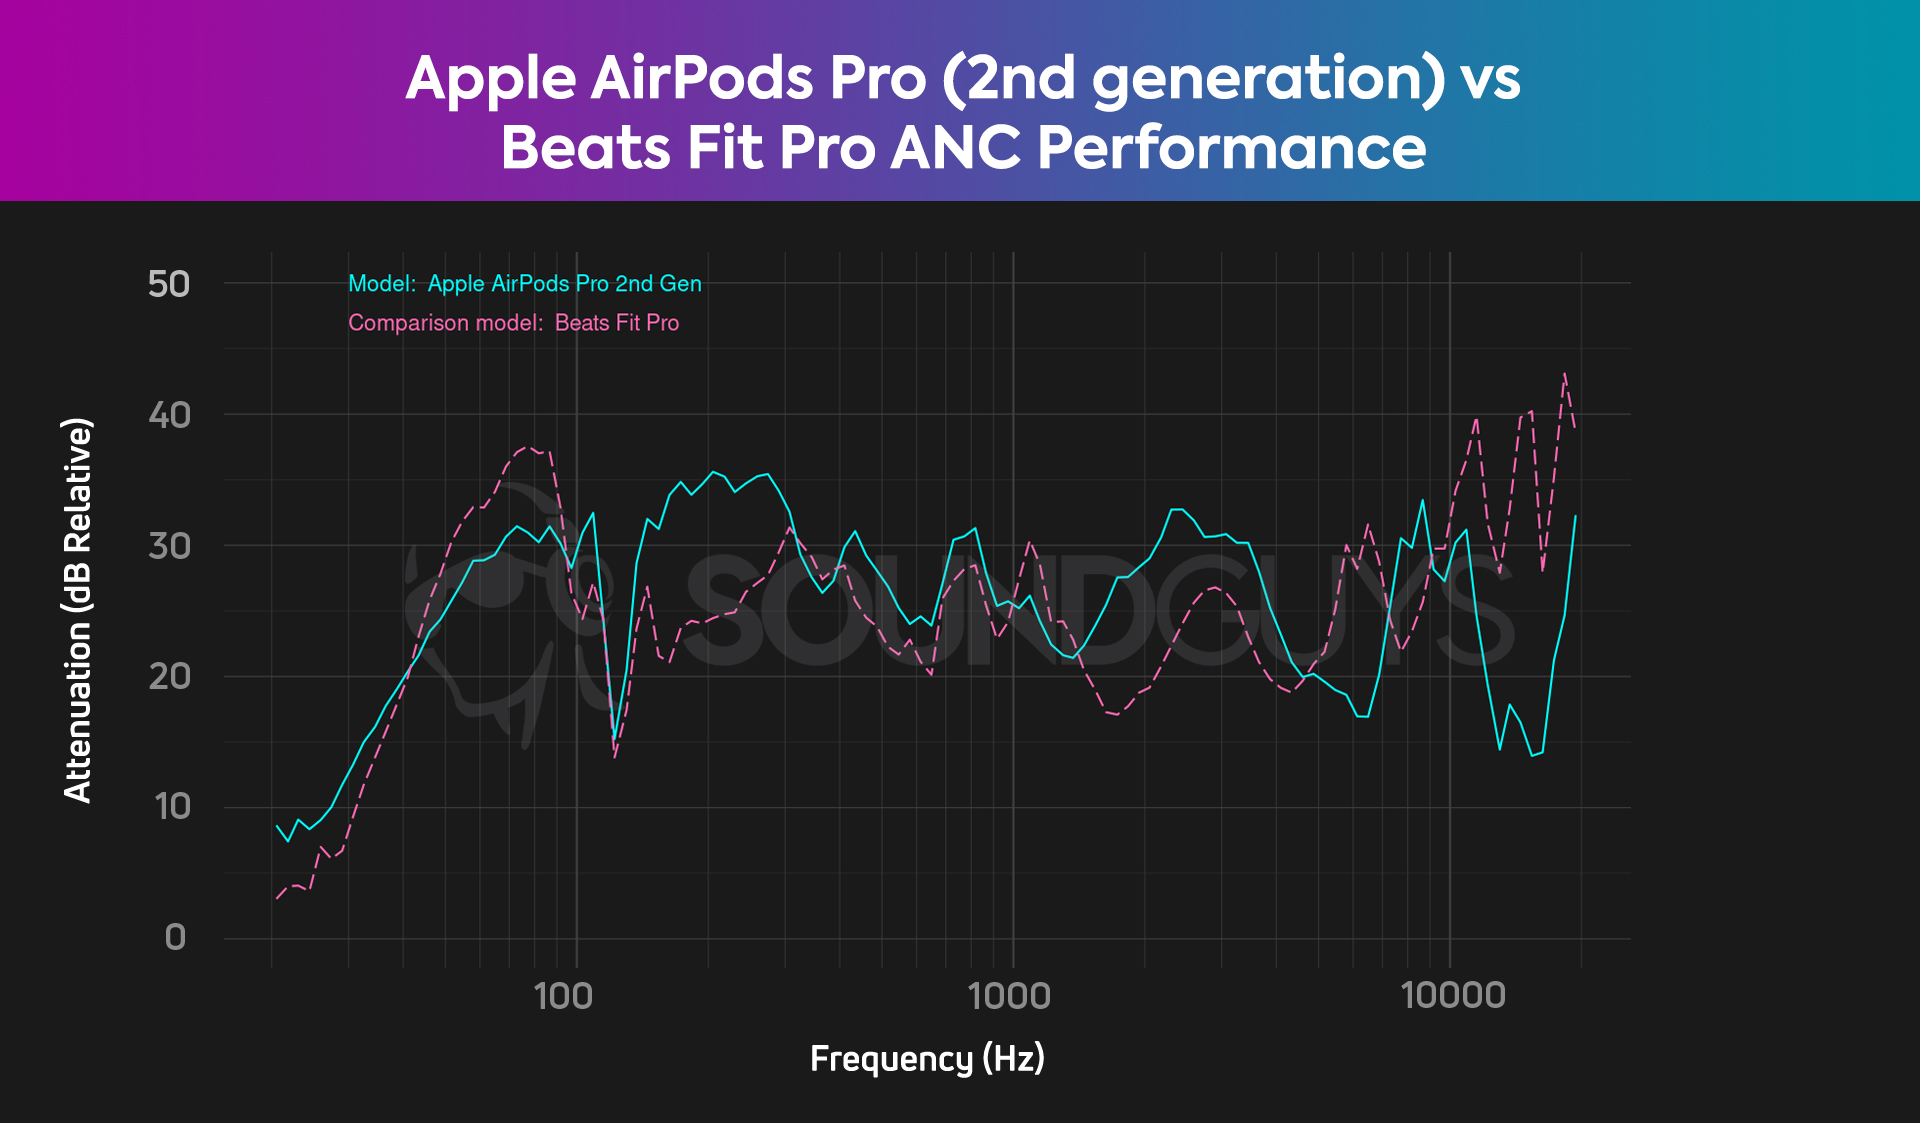 The noise canceling comparison chart for the AirPods Pro (2nd generation) and the Beats Fit Pro, which shows that both earbuds have really good noise canceling, with the AirPods Pro being just slightly better.